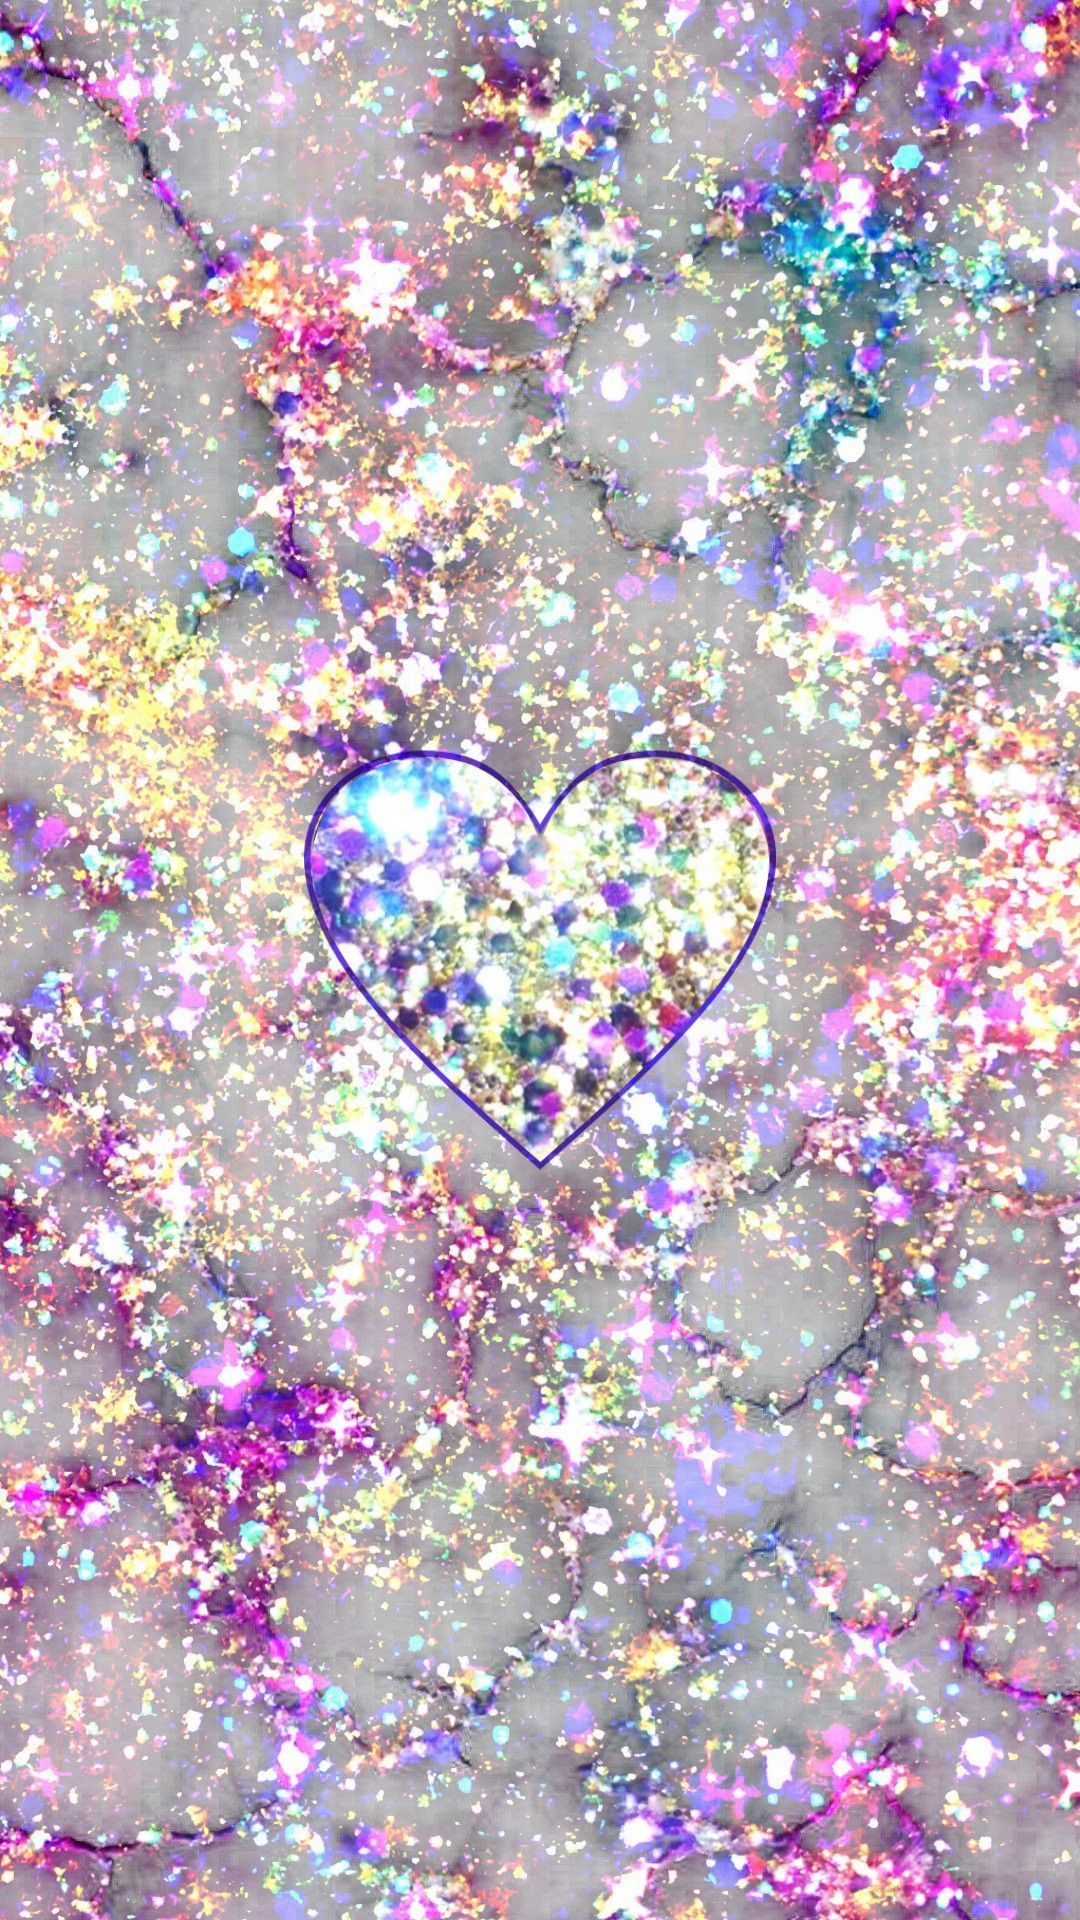 Glittery Marble Heart, made by me #purple #sparkly #wallpaper